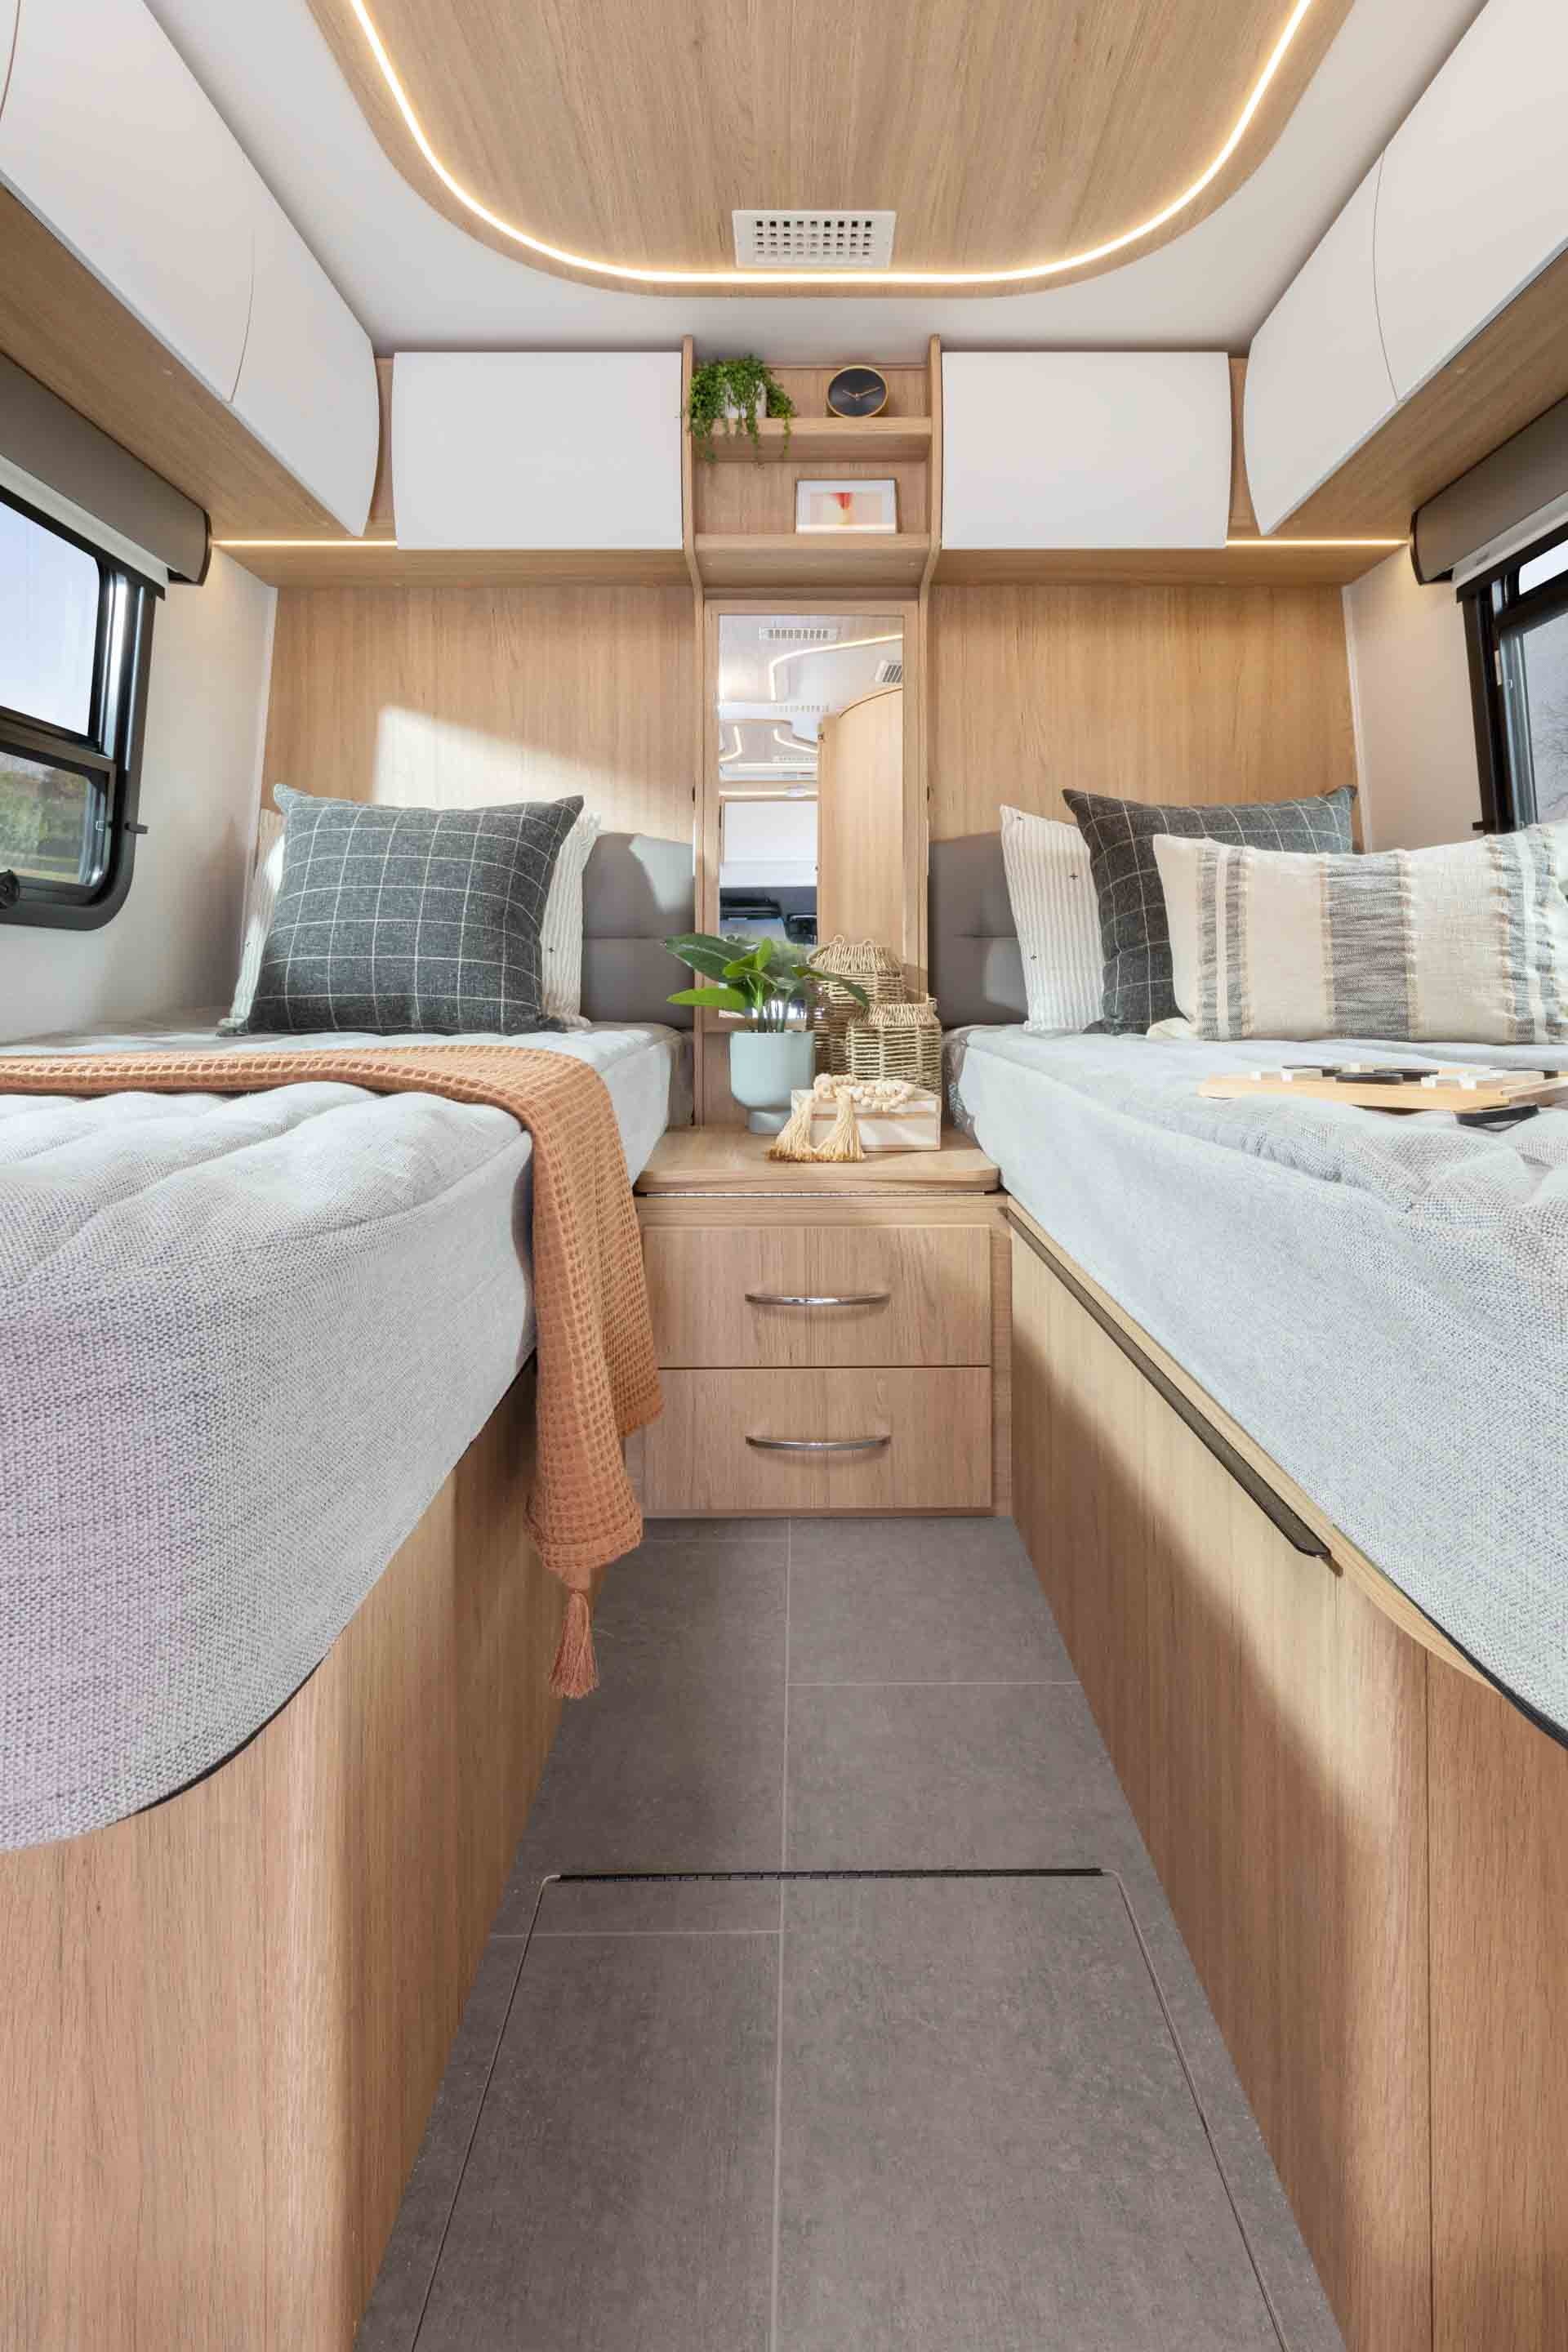 https://s1.cdn.autoevolution.com/images/news/gallery/the-2023-unity-twin-bed-is-the-perfect-weekend-getaway-rv-has-two-flexible-living-spaces_14.jpg